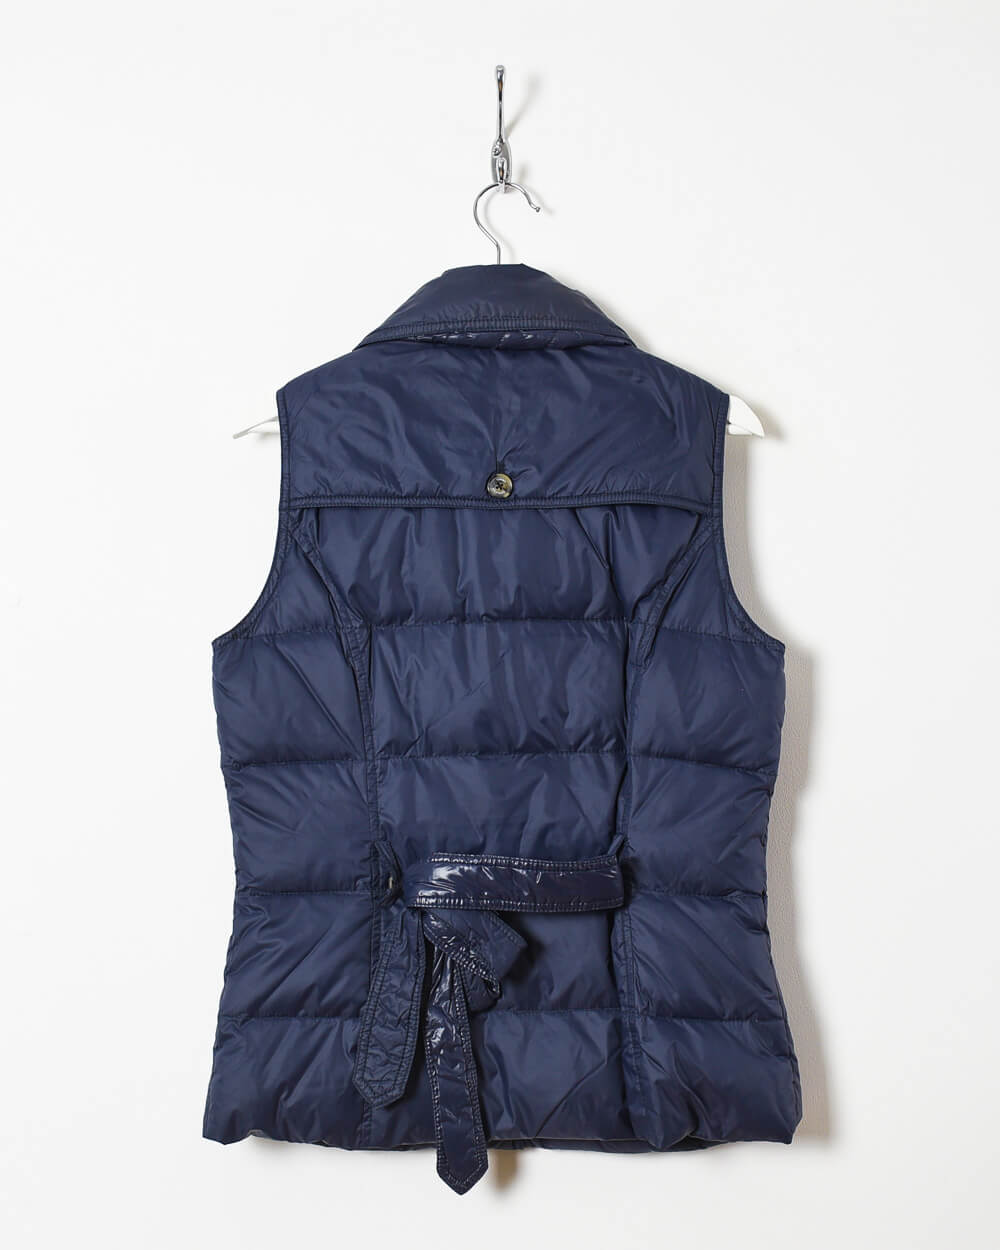 Navy Tommy Hilfiger Women's Down Gilet - Large